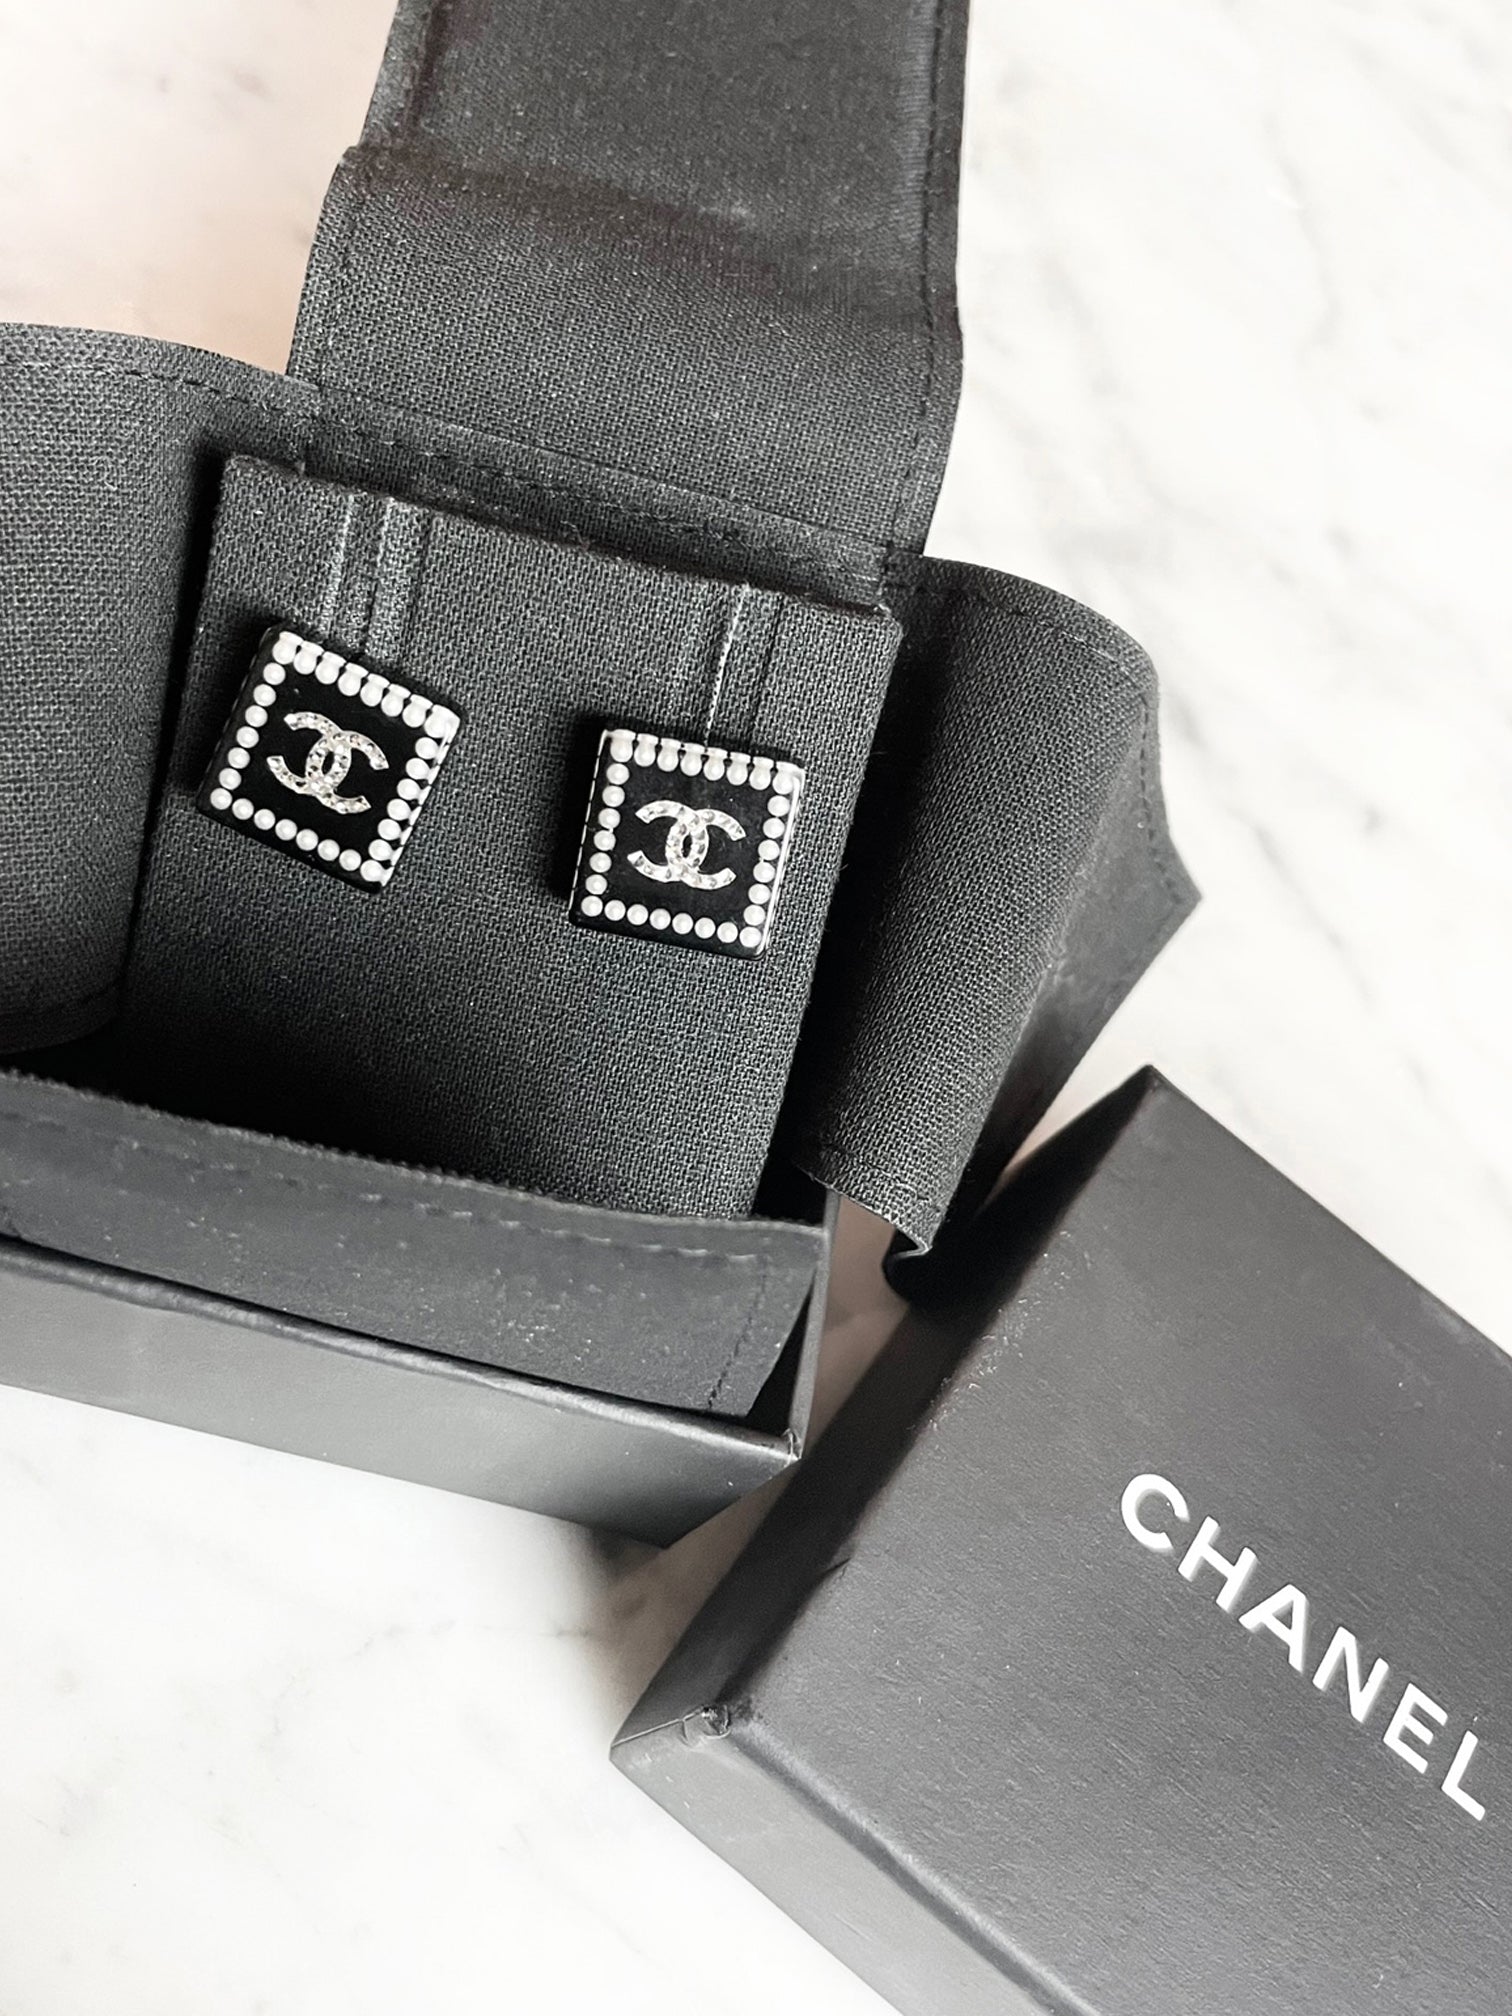 Chanel 2014 Cruise Collection Earrings